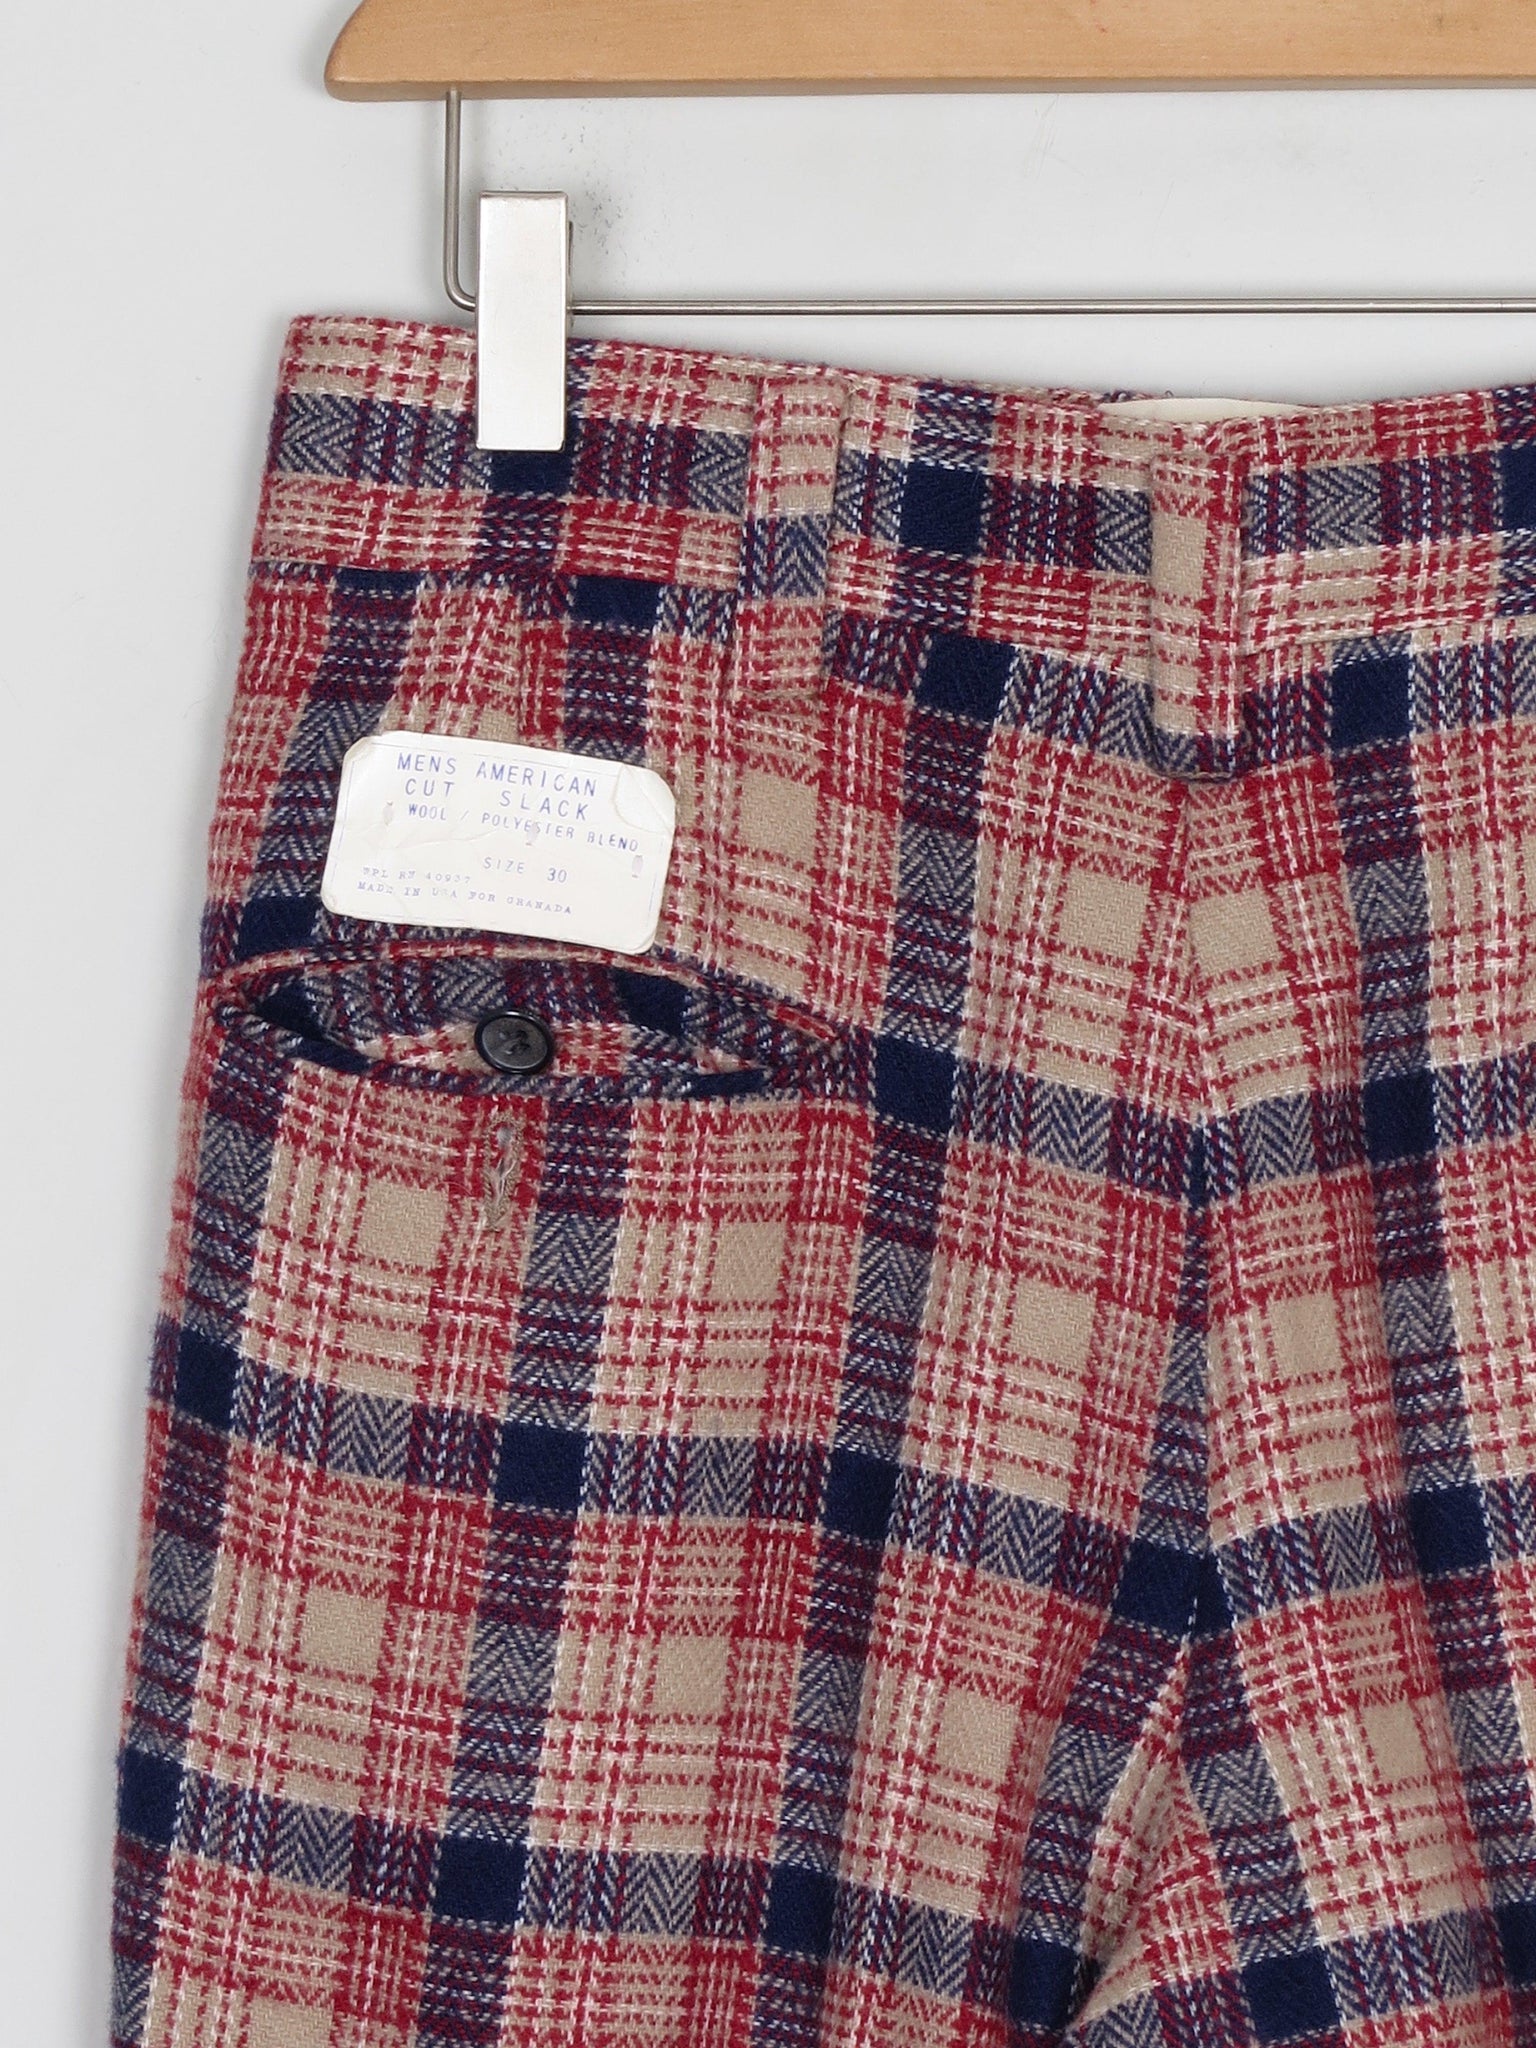 Men's Vintage Check Dead-stock  Trousers 31"32L - The Harlequin